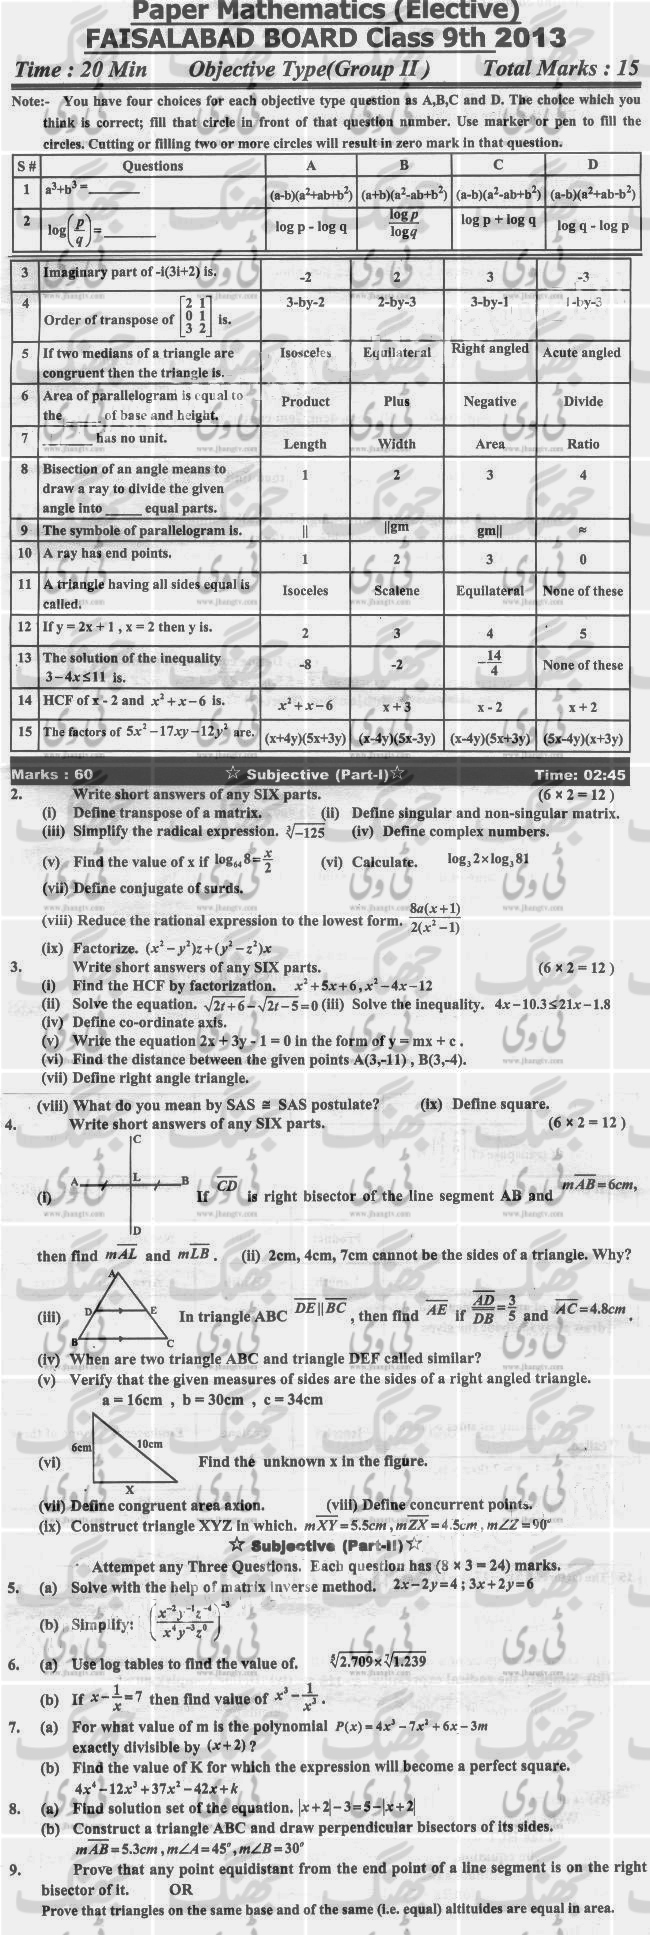 Past-Papers-2013-Faisalabad-Board-9th-Class-Mathematics-Elective-Group-2-English-Version copy